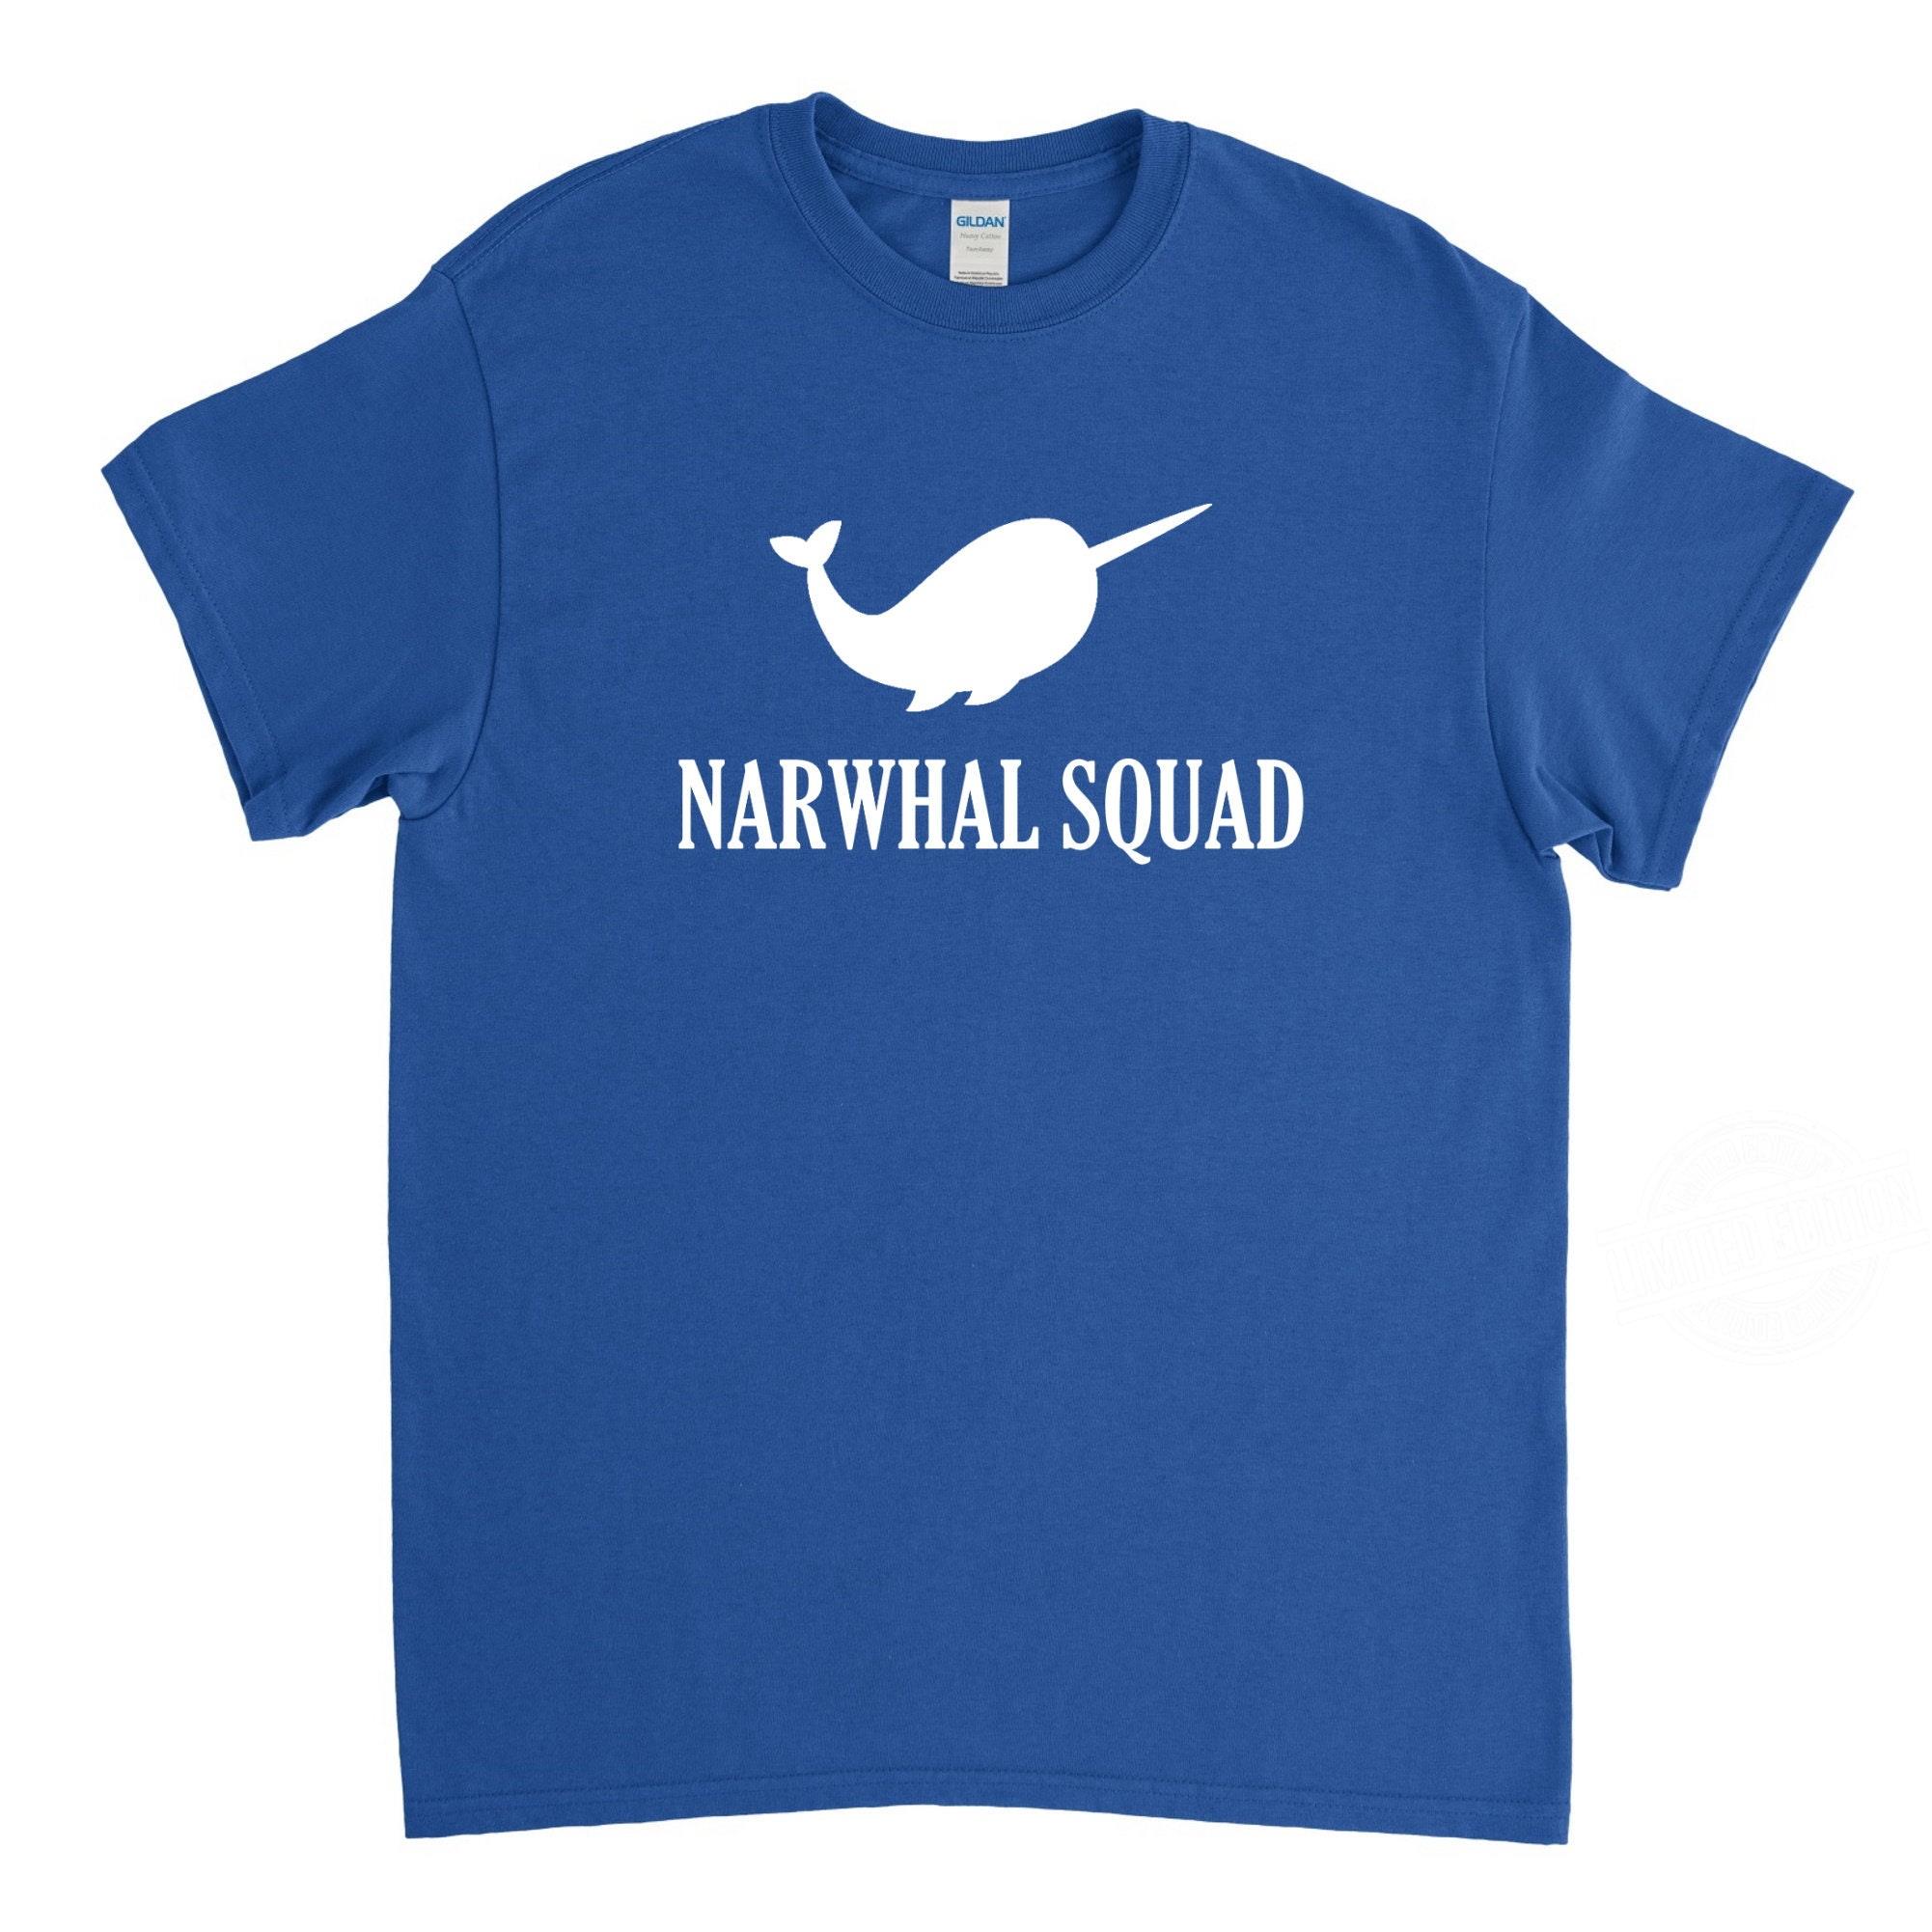 Narwhal Squad Shirt